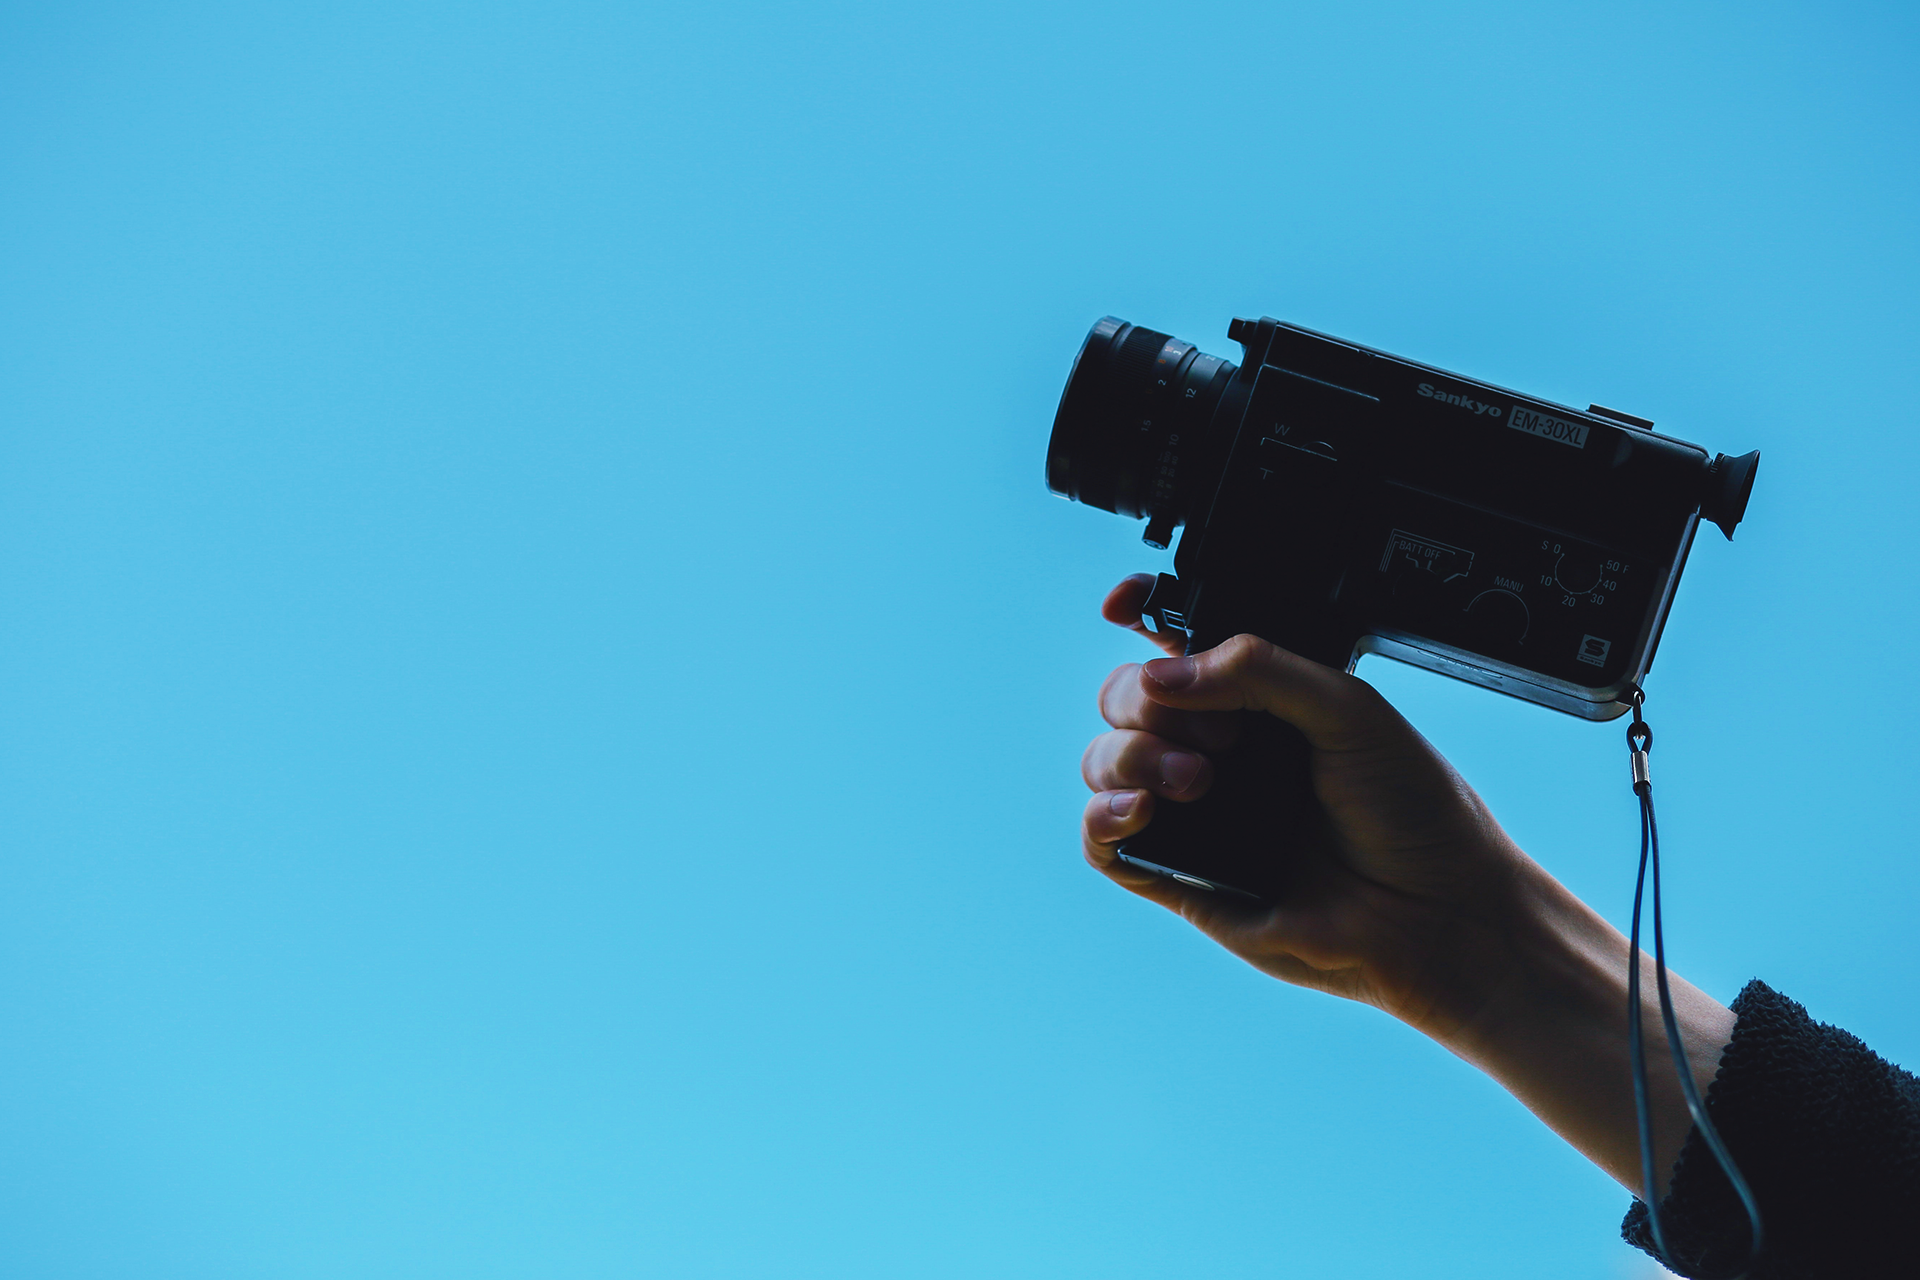 Woman's hand holding a camera like a gun over a blue background.